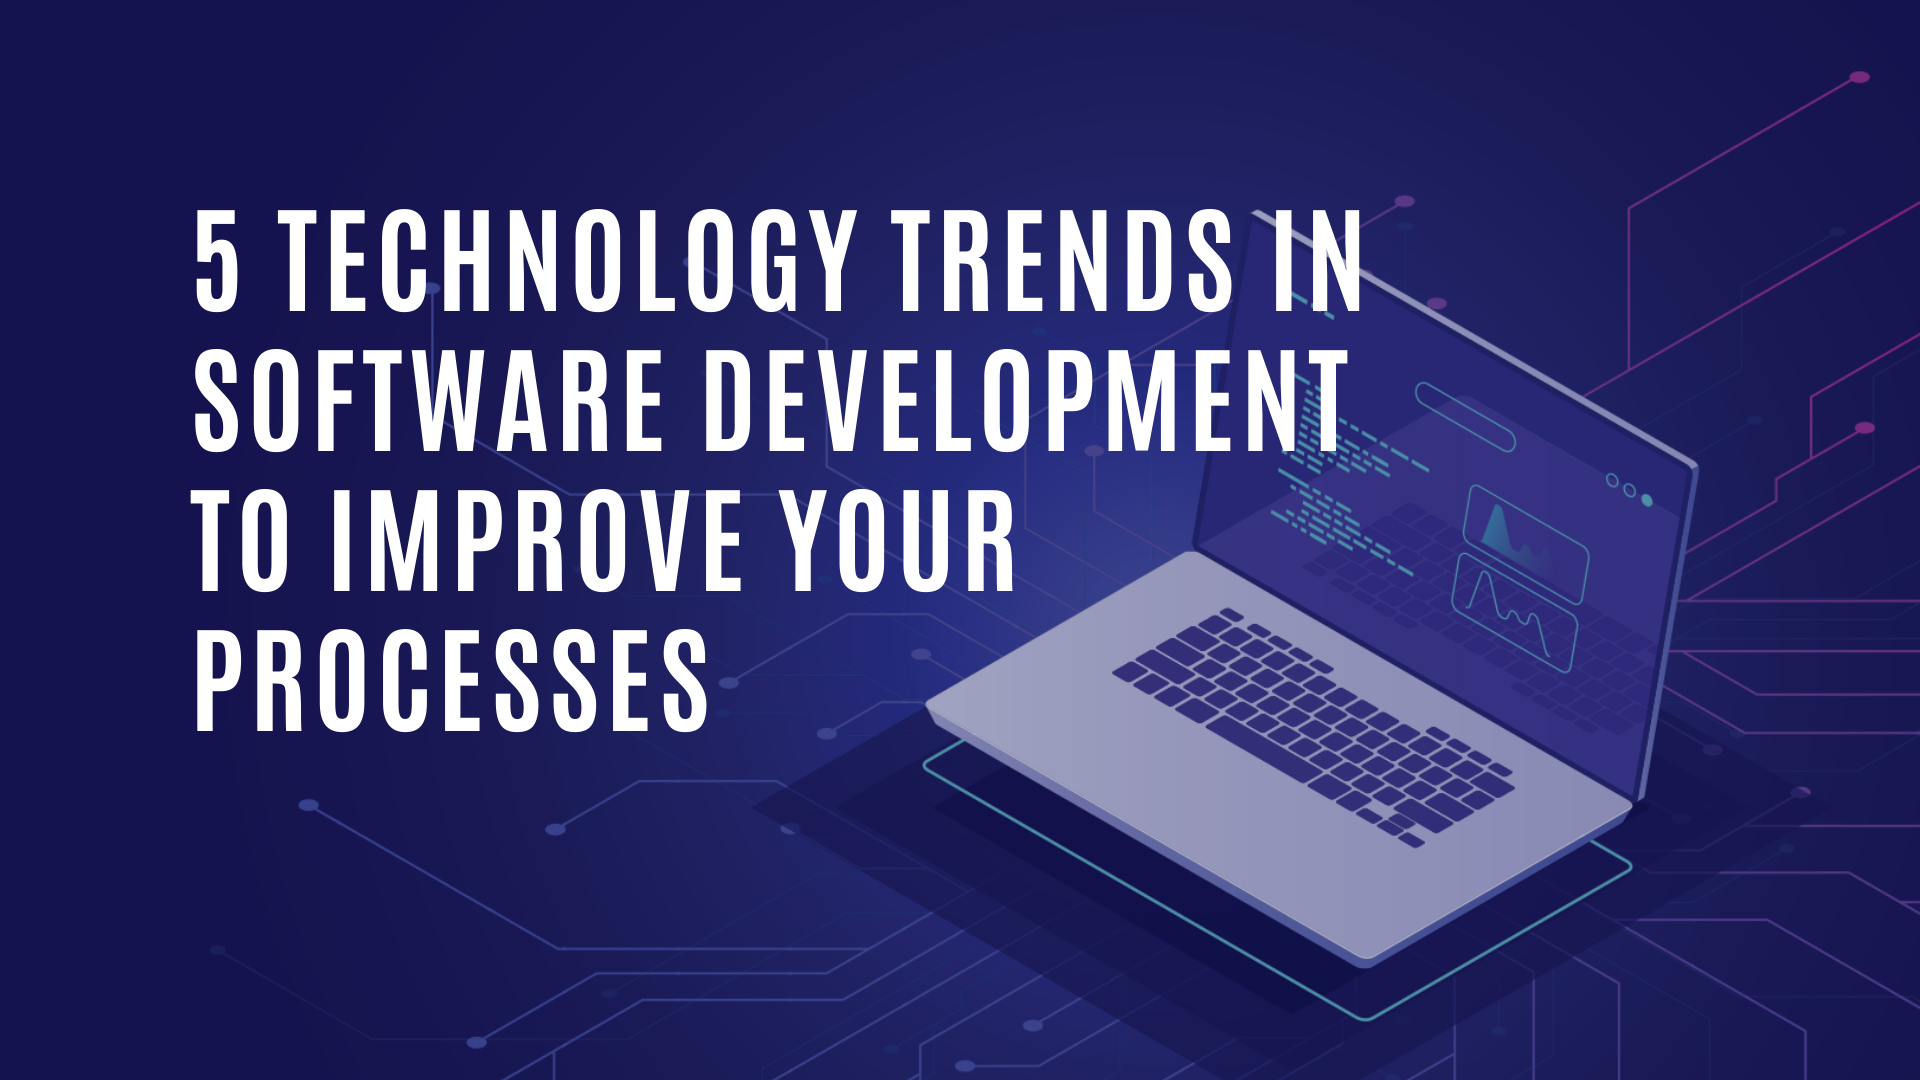 5 Technology Trends in Software Development to Improve Your Processes